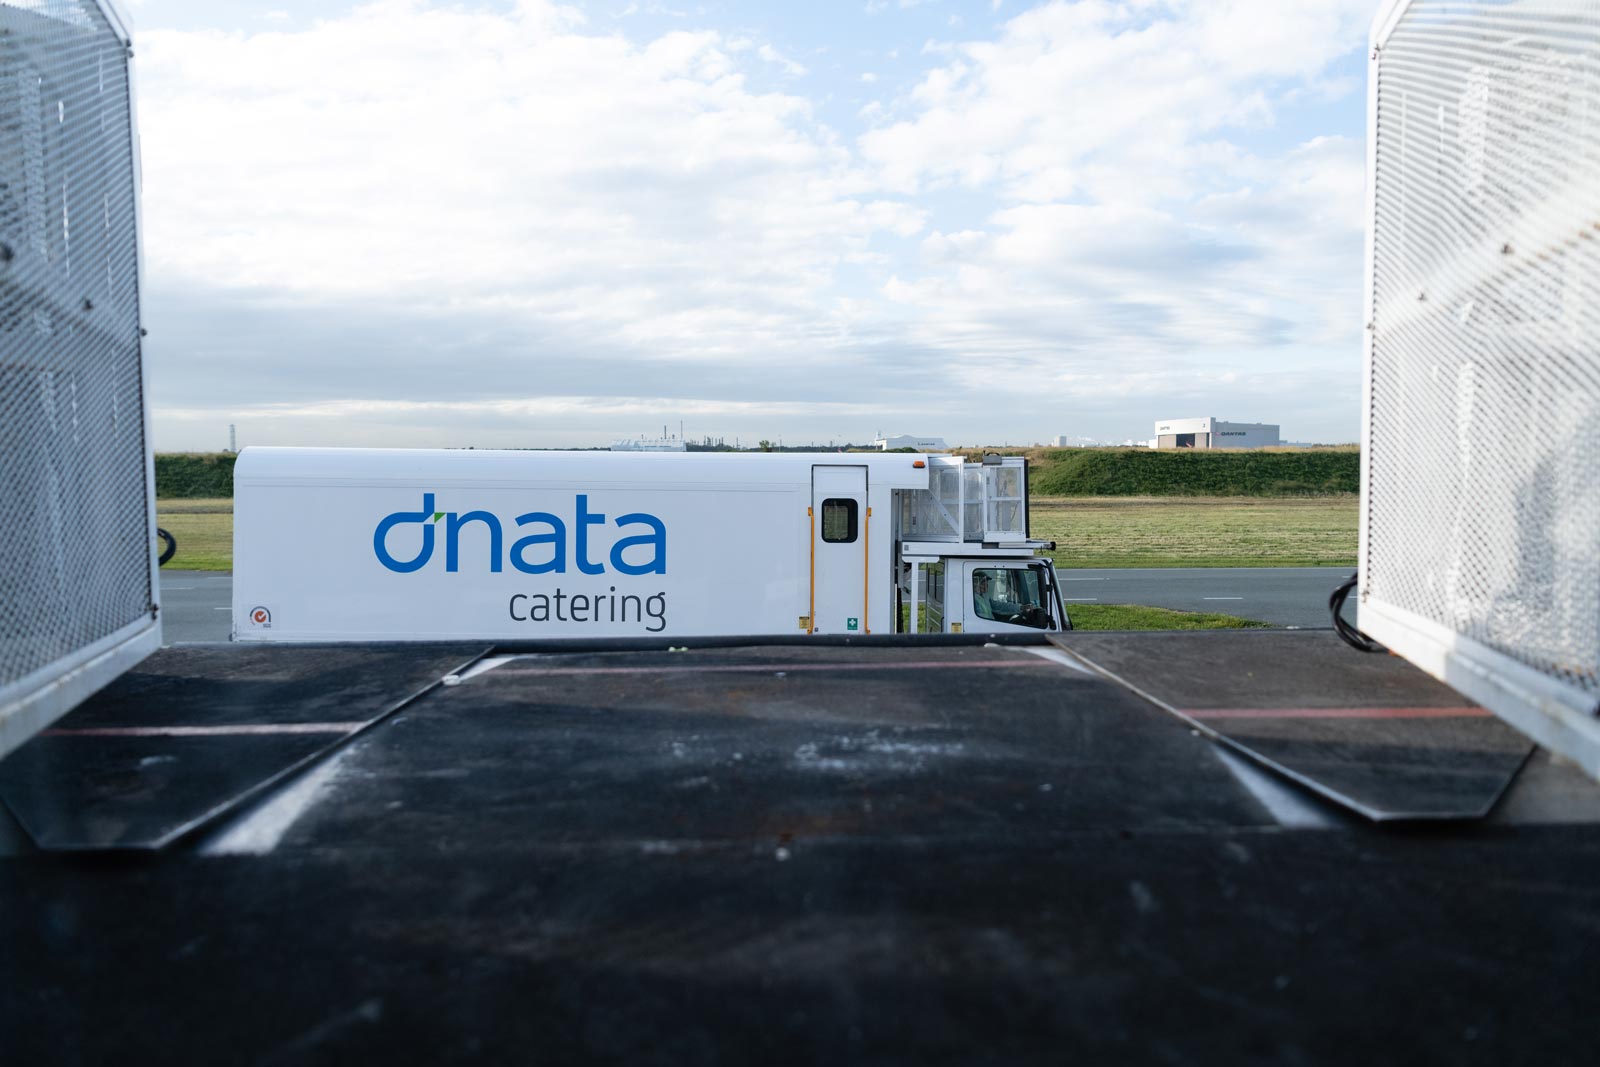 dnata is Australia’s largest inflight caterer